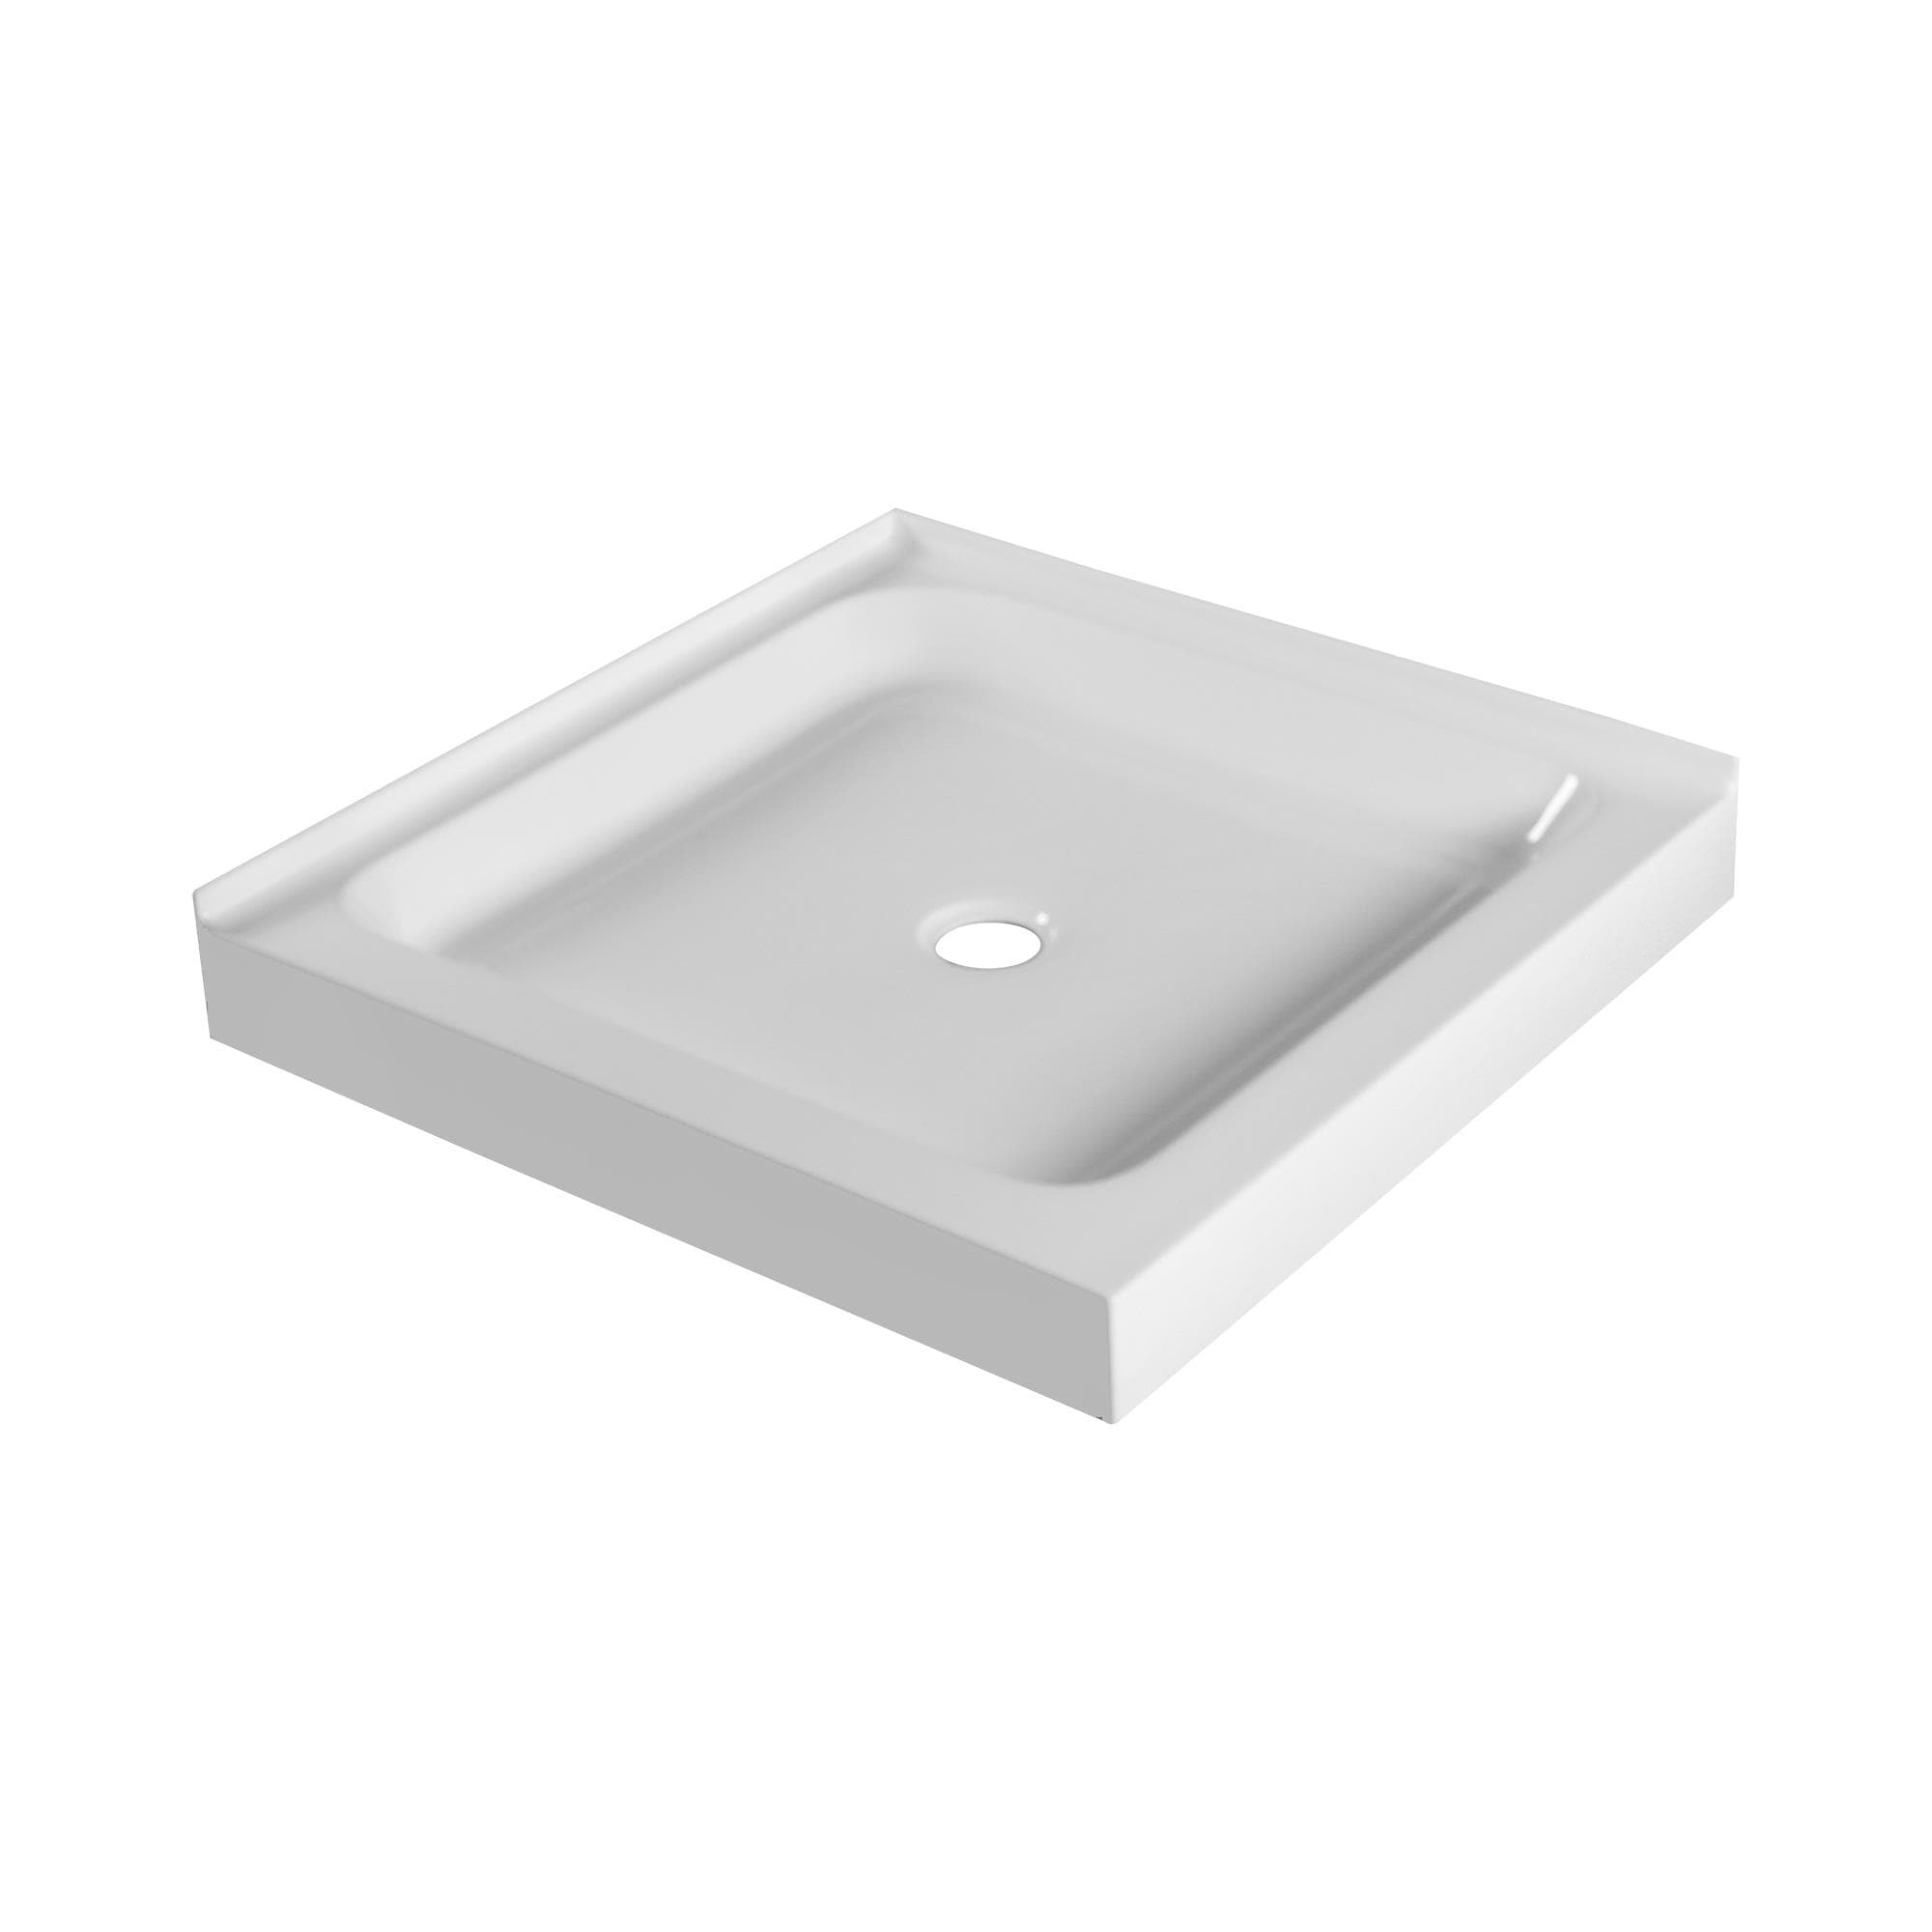 https://ak1.ostkcdn.com/images/products/is/images/direct/eb6fdc332fbef55a117ff3f445215a3be647e5fa/Fine-Fixtures-Double-Threshold-Acrylic-Shower-Base---Non-Slip-Textured-Surface-Shower-Floor-Pan-in-White.jpg